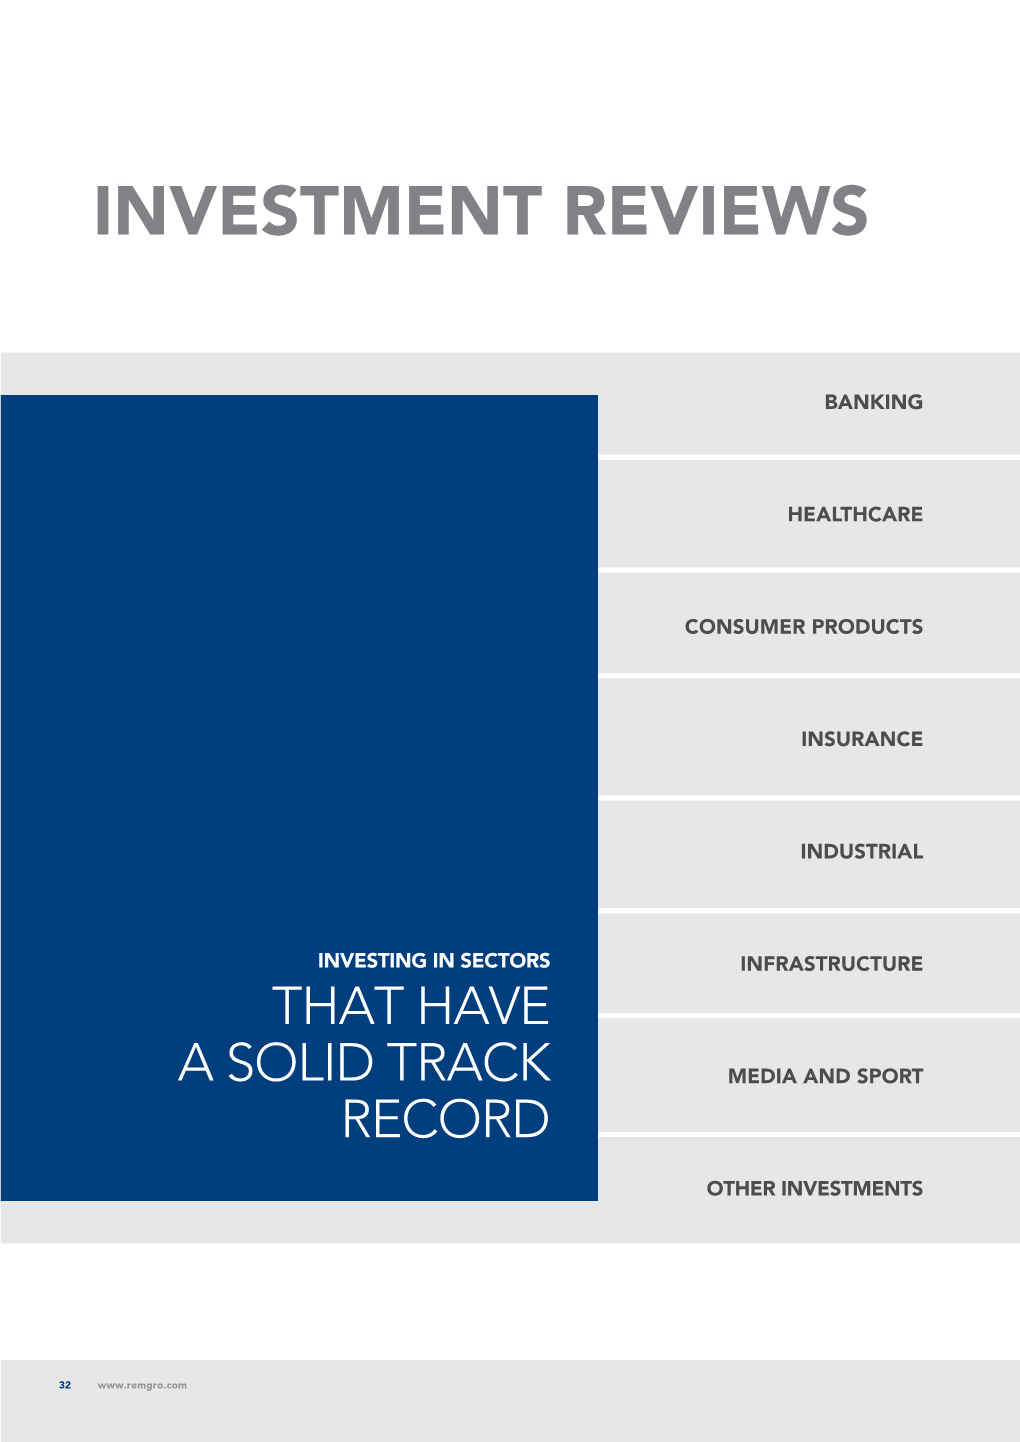 Investment Reviews